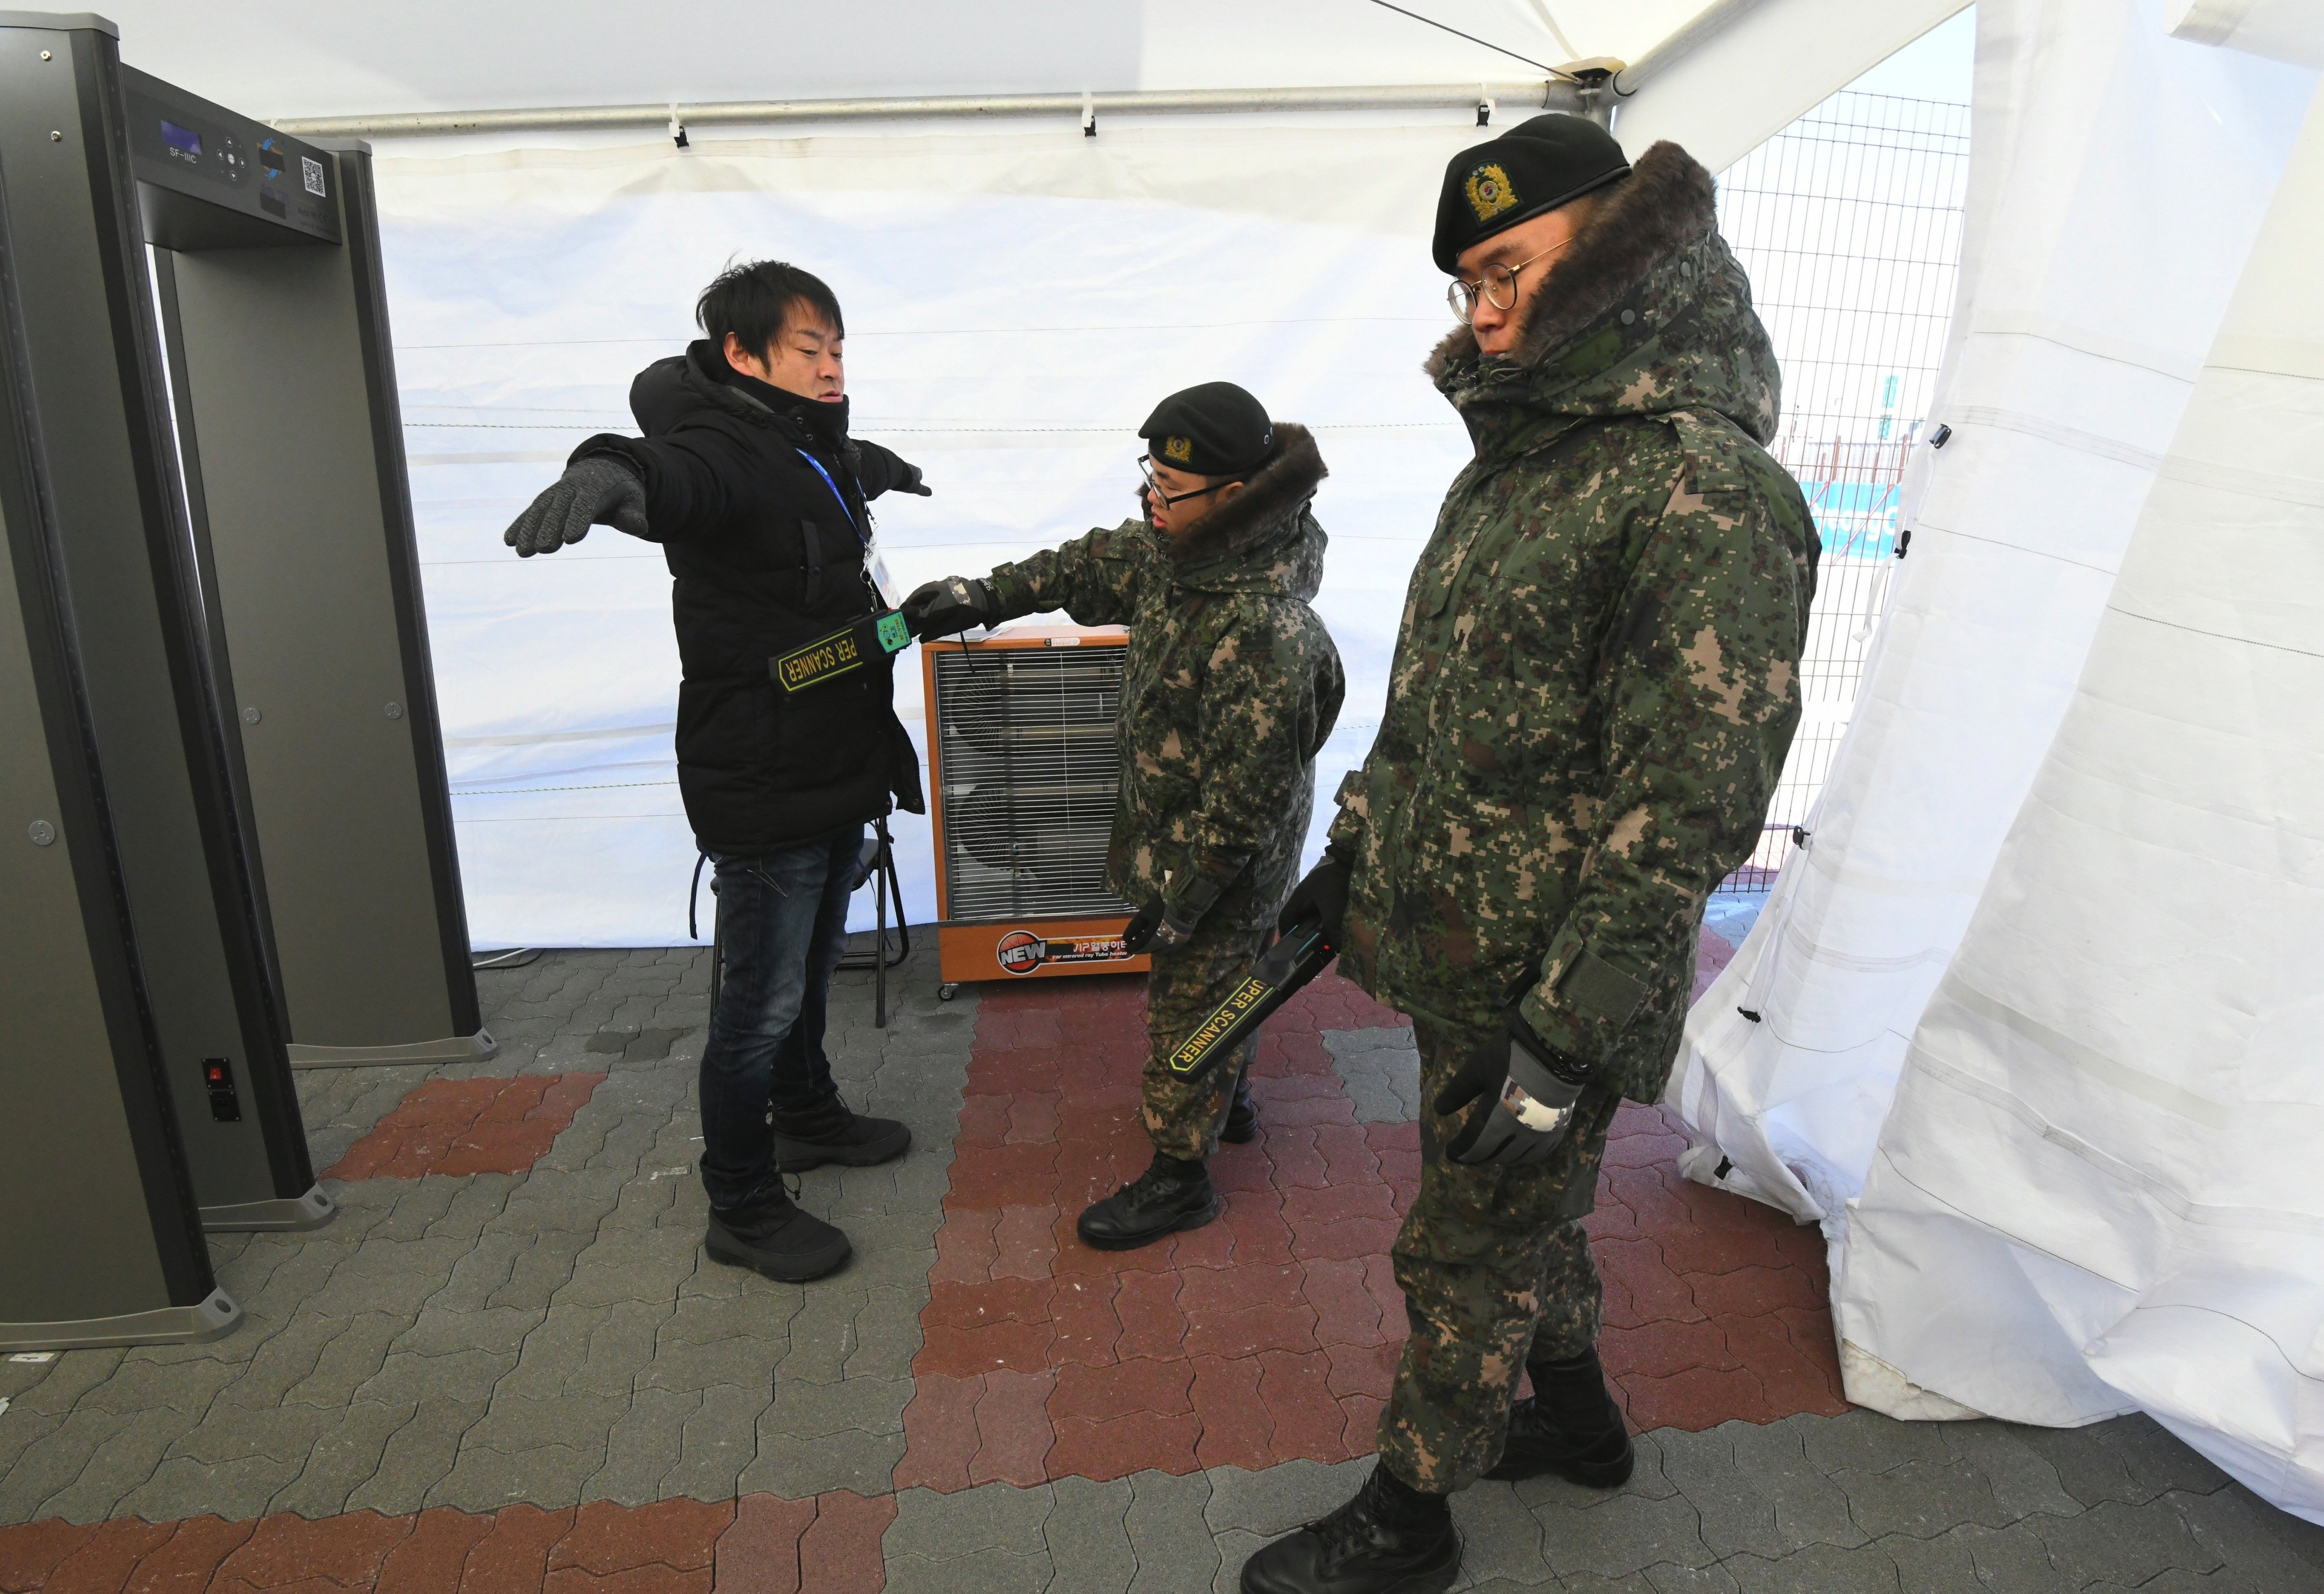 South Korean soldiers inspect a visitor at a security checkpoint as they replace security guards showing symptoms of the norovirus at the Gangneung Ice Arena in Gangneung on February 6, 2018 ahead of the PyeongChang 2018 Winter Olympic Games. (JUNG YEON-JE—AFP/Getty Images)